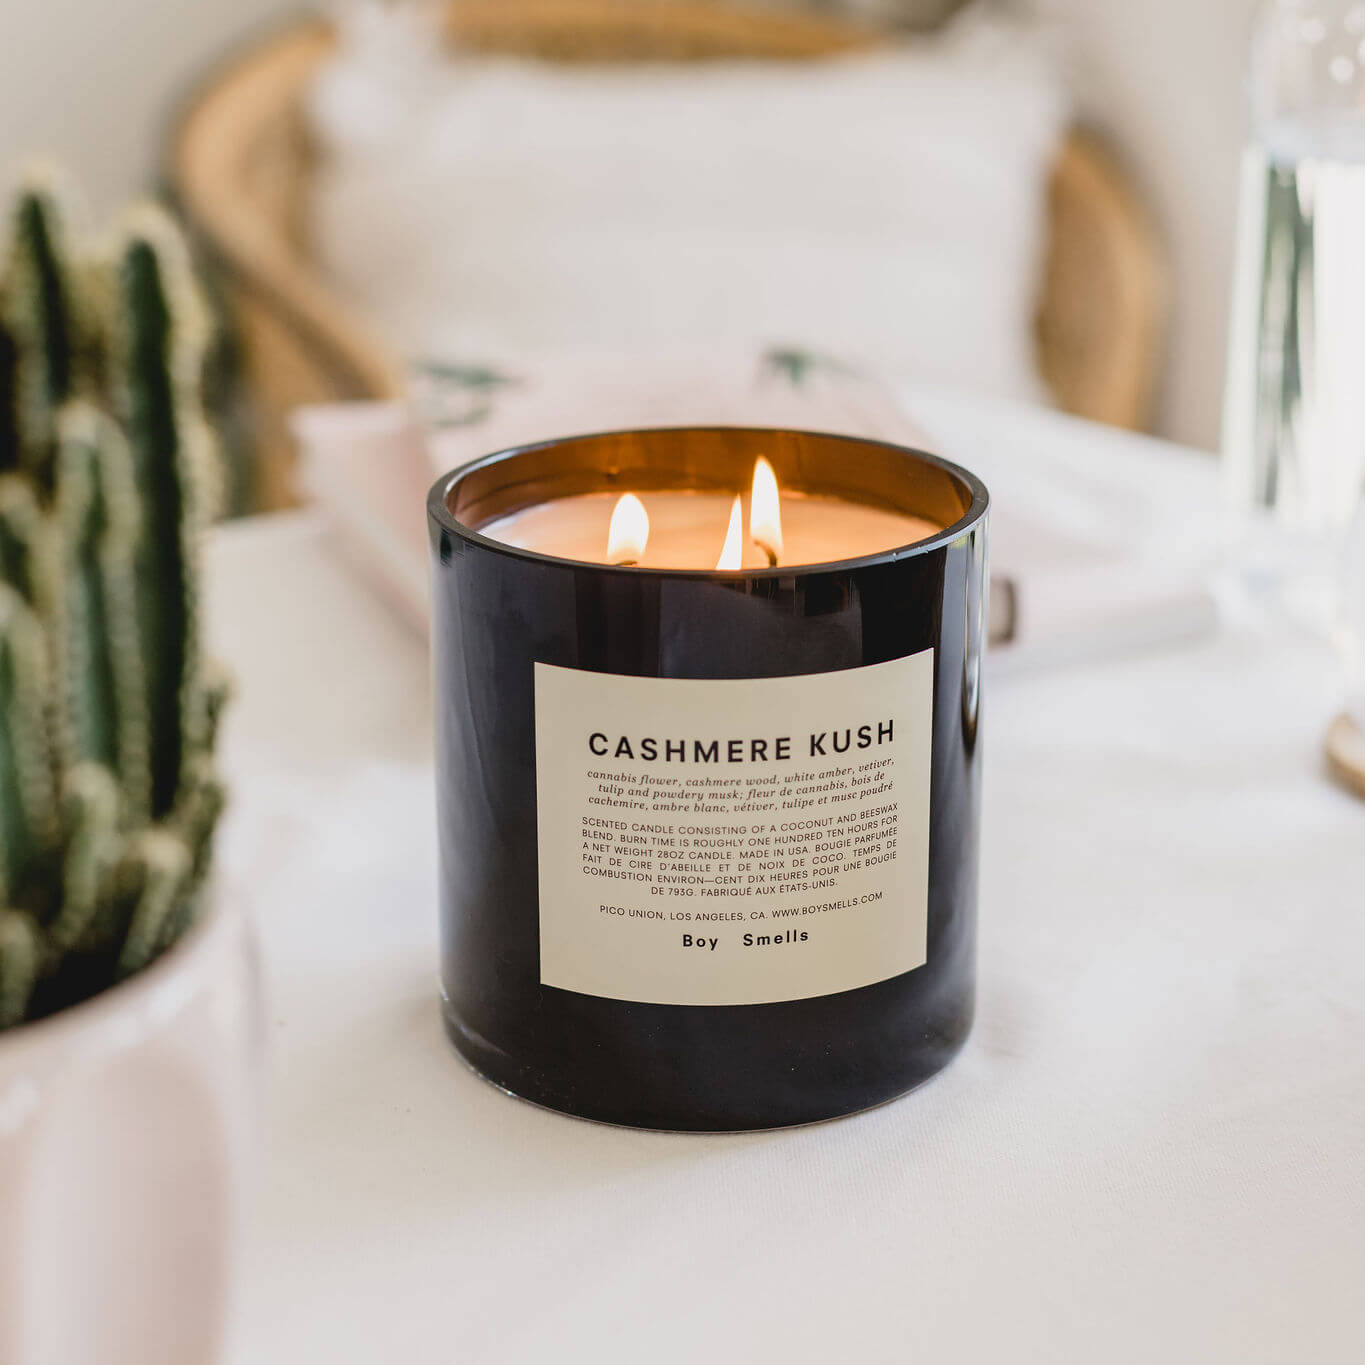 Boy Smells Cashmere Kush Scented Candle - Osmology Scented Candles & Home Fragrance